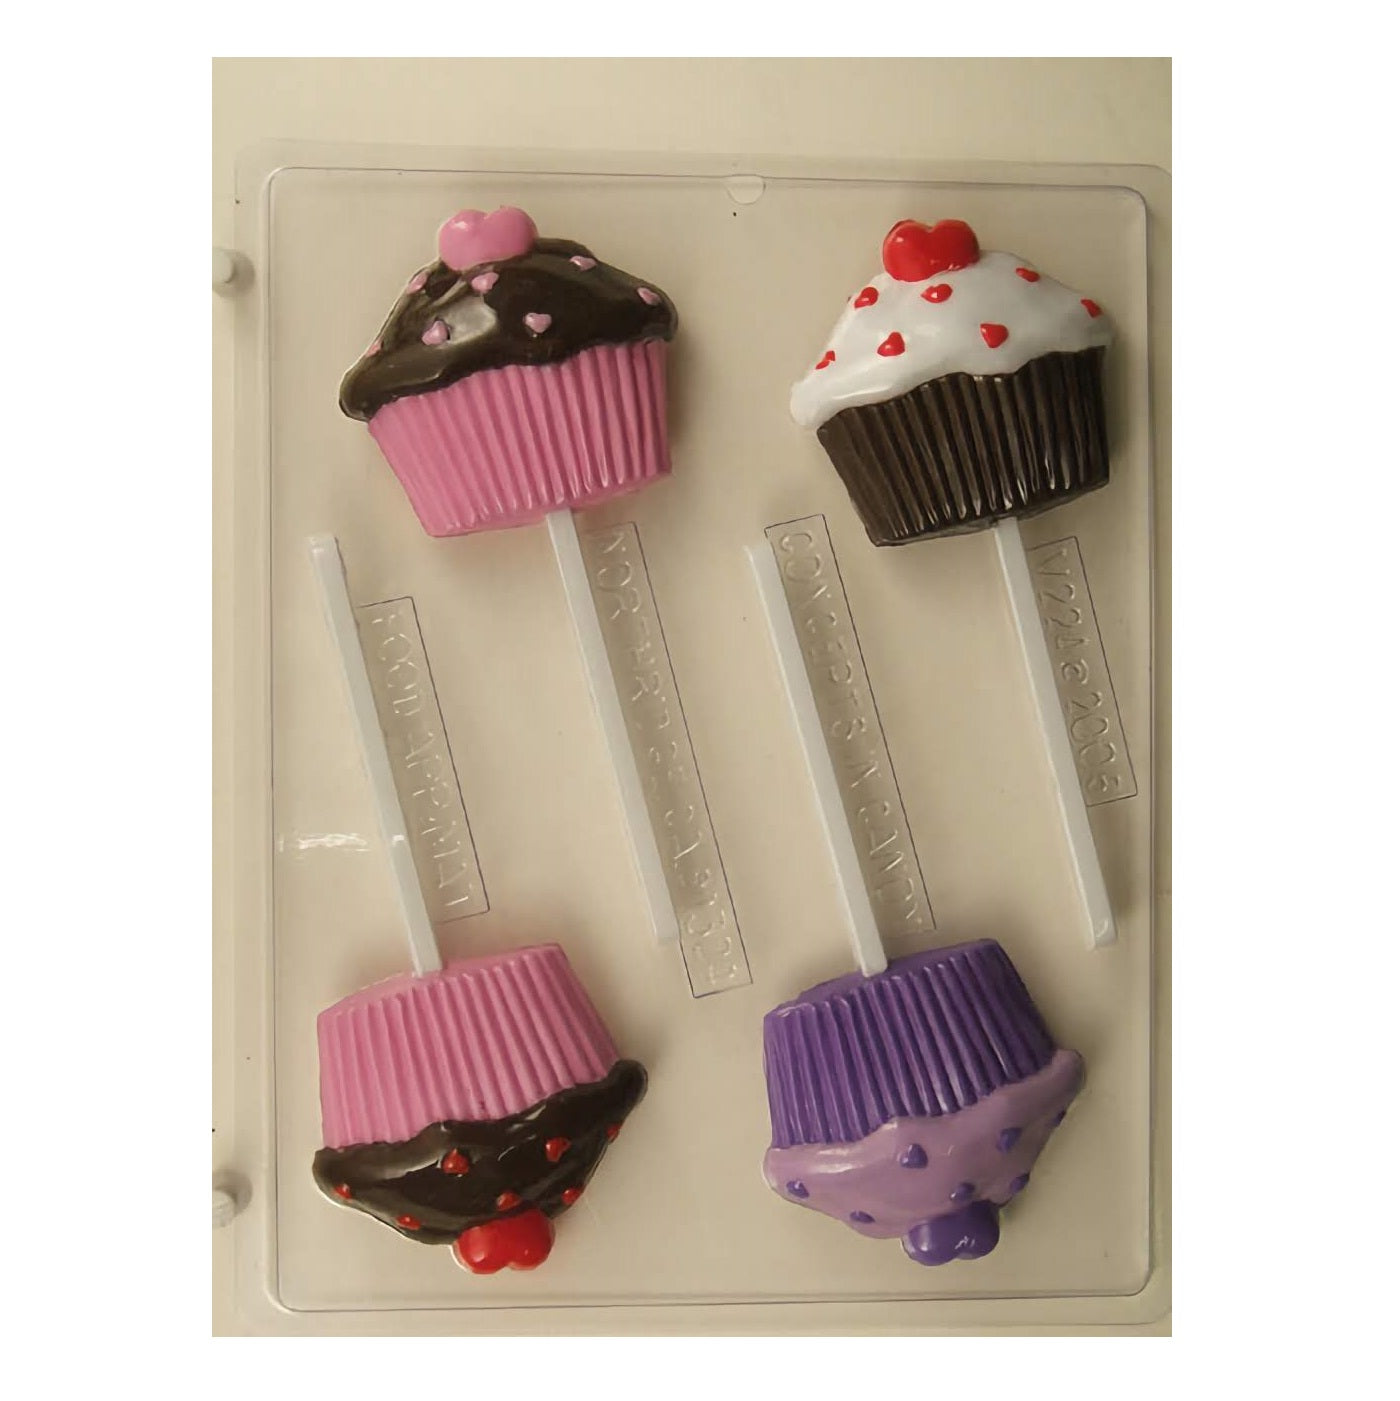 Chocolate sucker mold with three cupcake-shaped cavities, each topped with different decorative elements like hearts and sprinkles, alongside examples of finished chocolate cupcakes showcasing vibrant colors and designs.